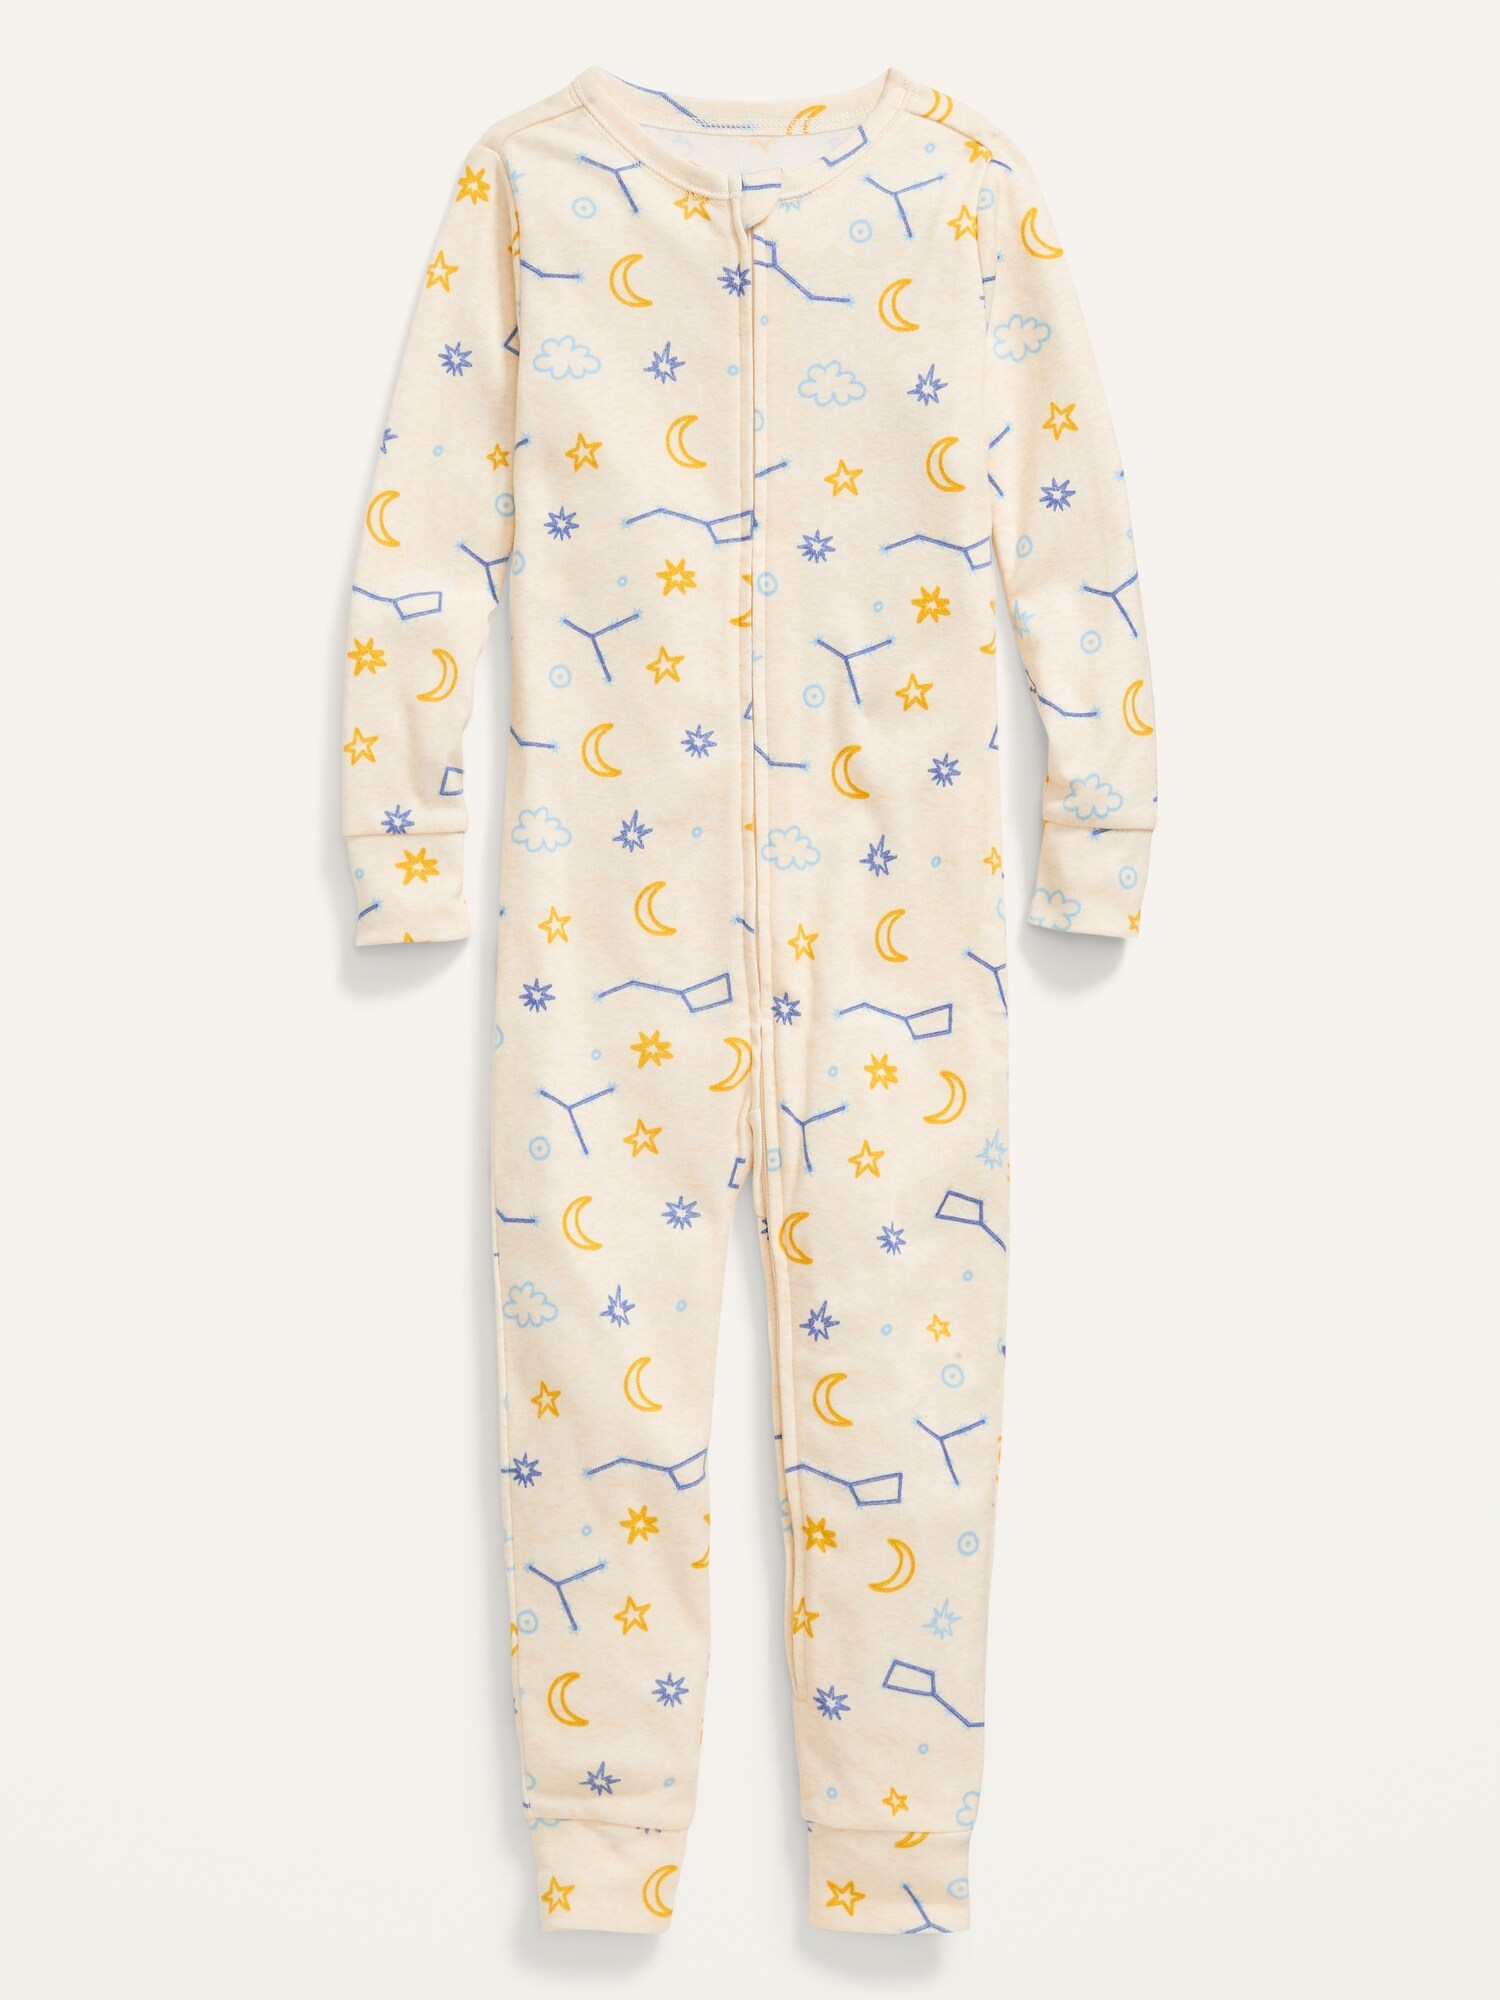 Unisex Printed One-Piece Pajamas for Toddler & Baby | Old Navy